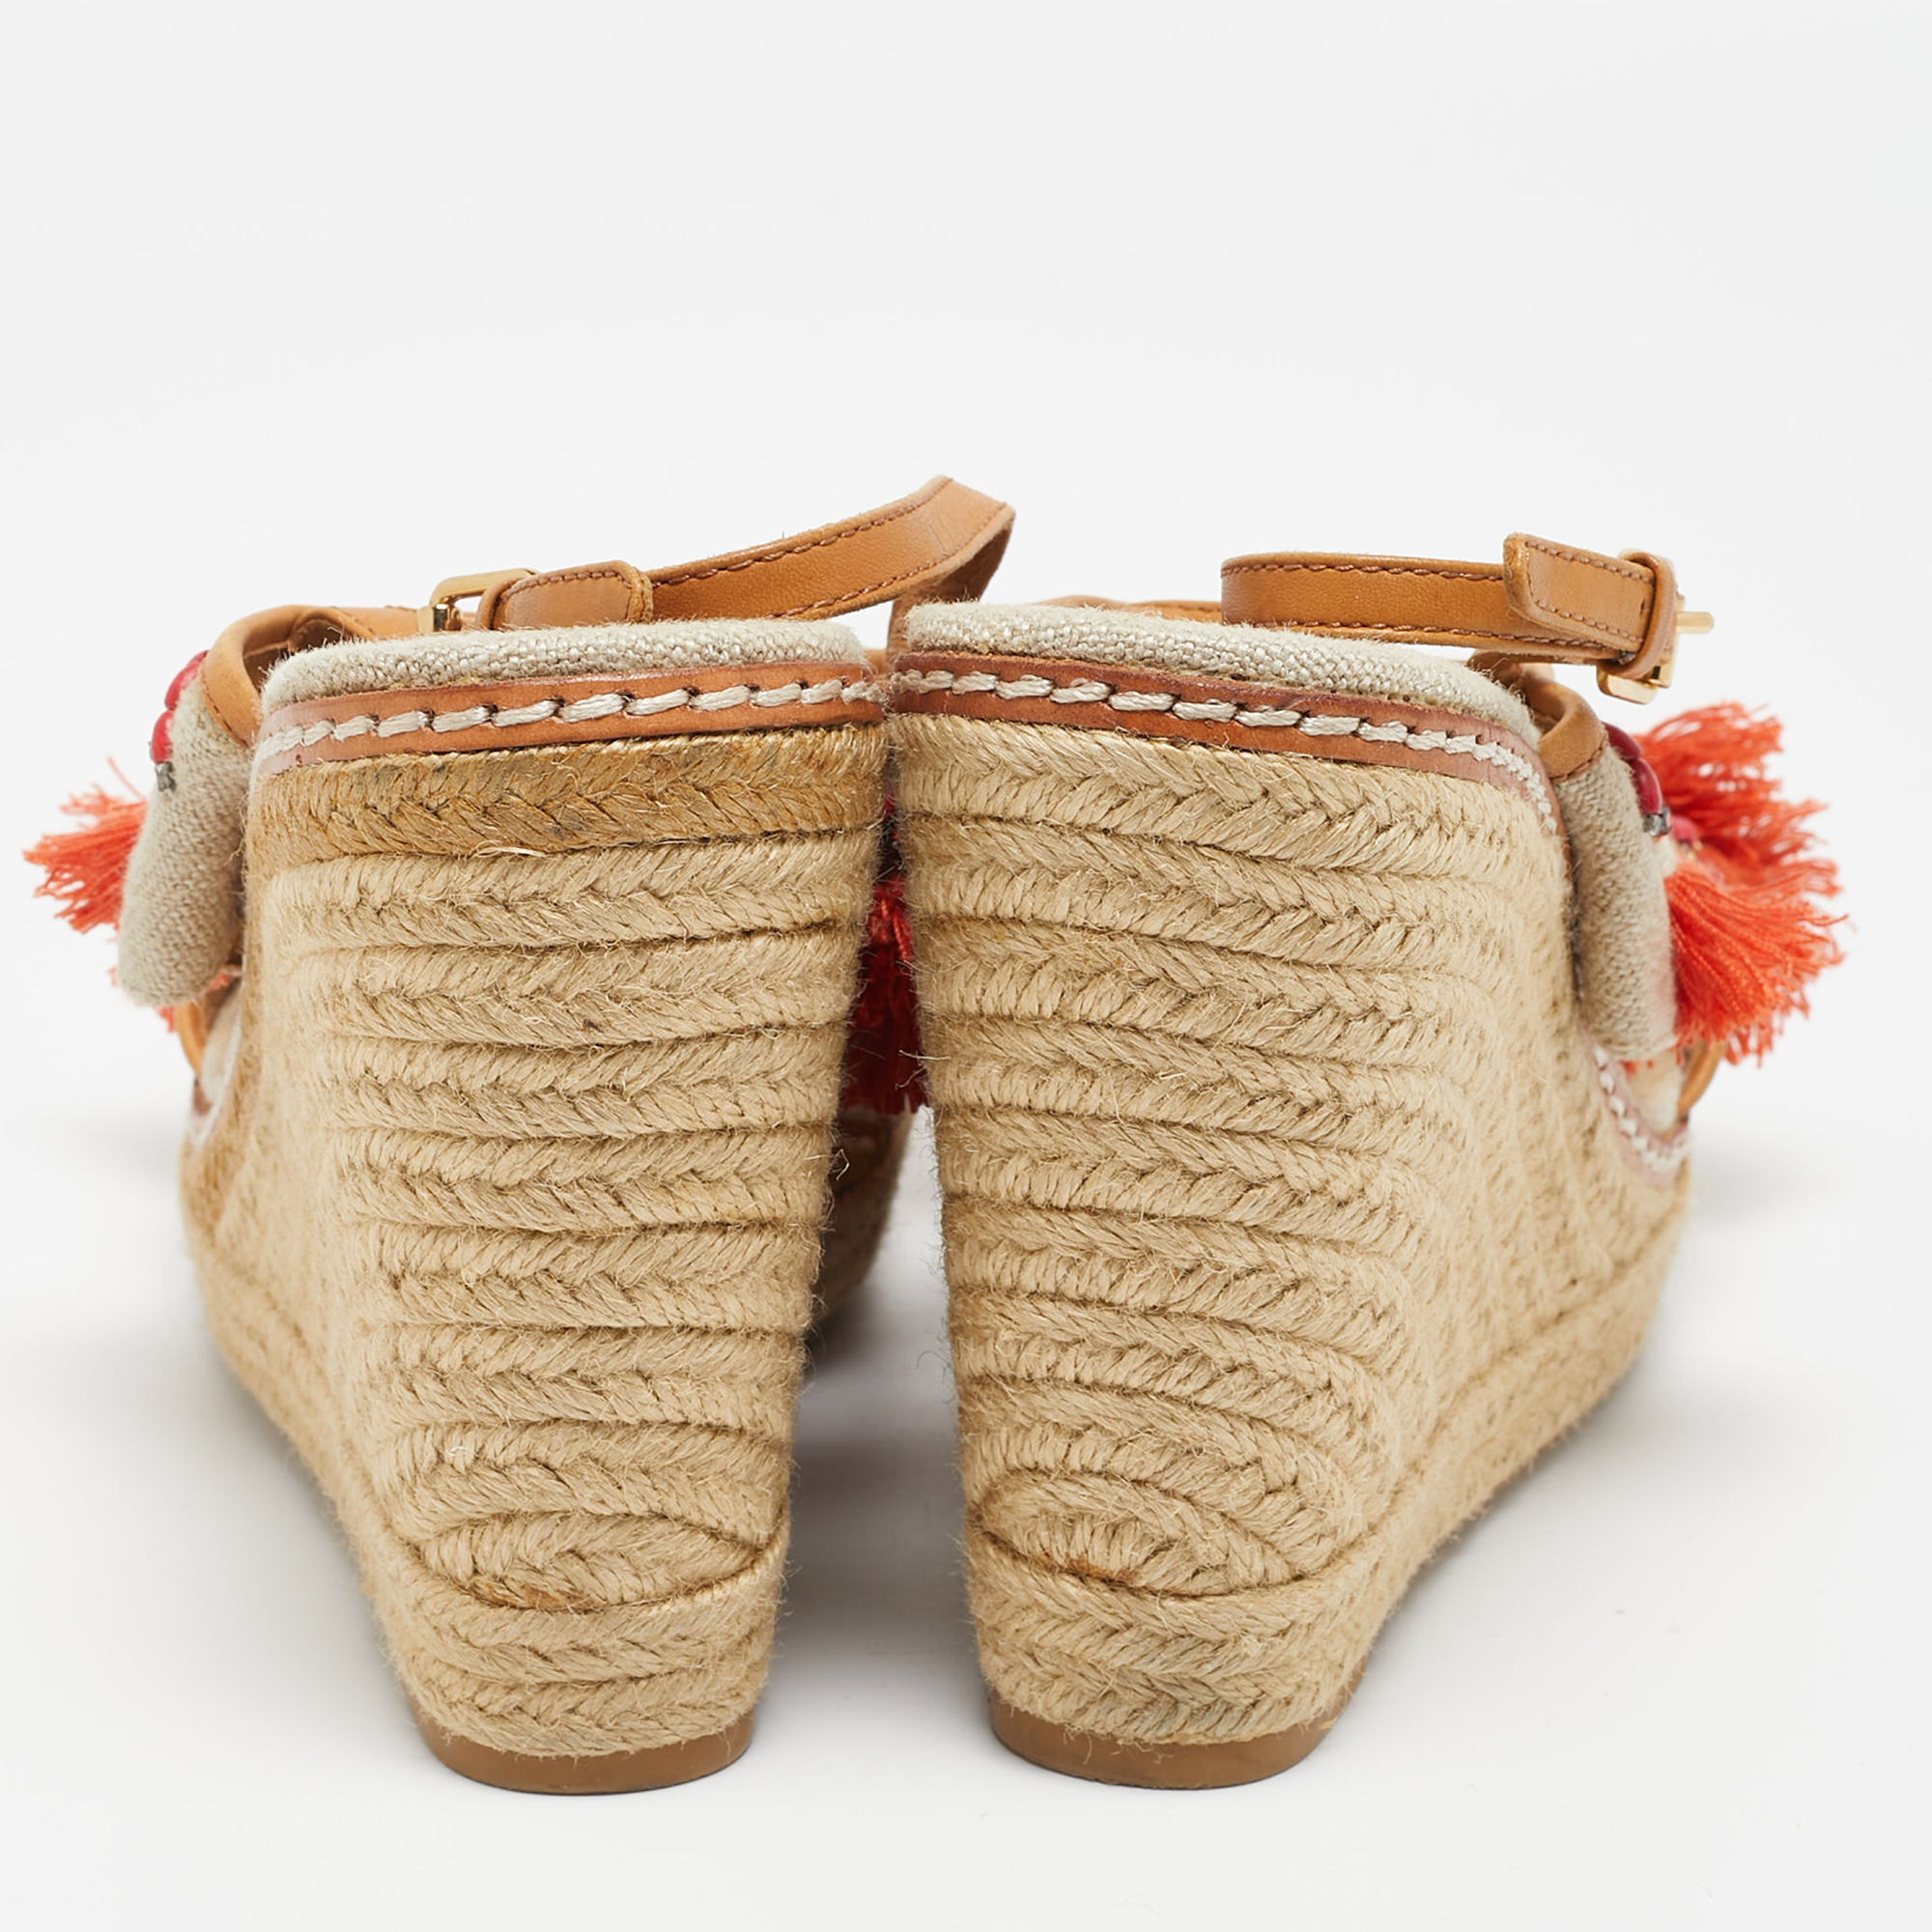 Tory Burch Beige/Orange Canvas And Leather Niyah Espadrille Wedge Sandals Size 40